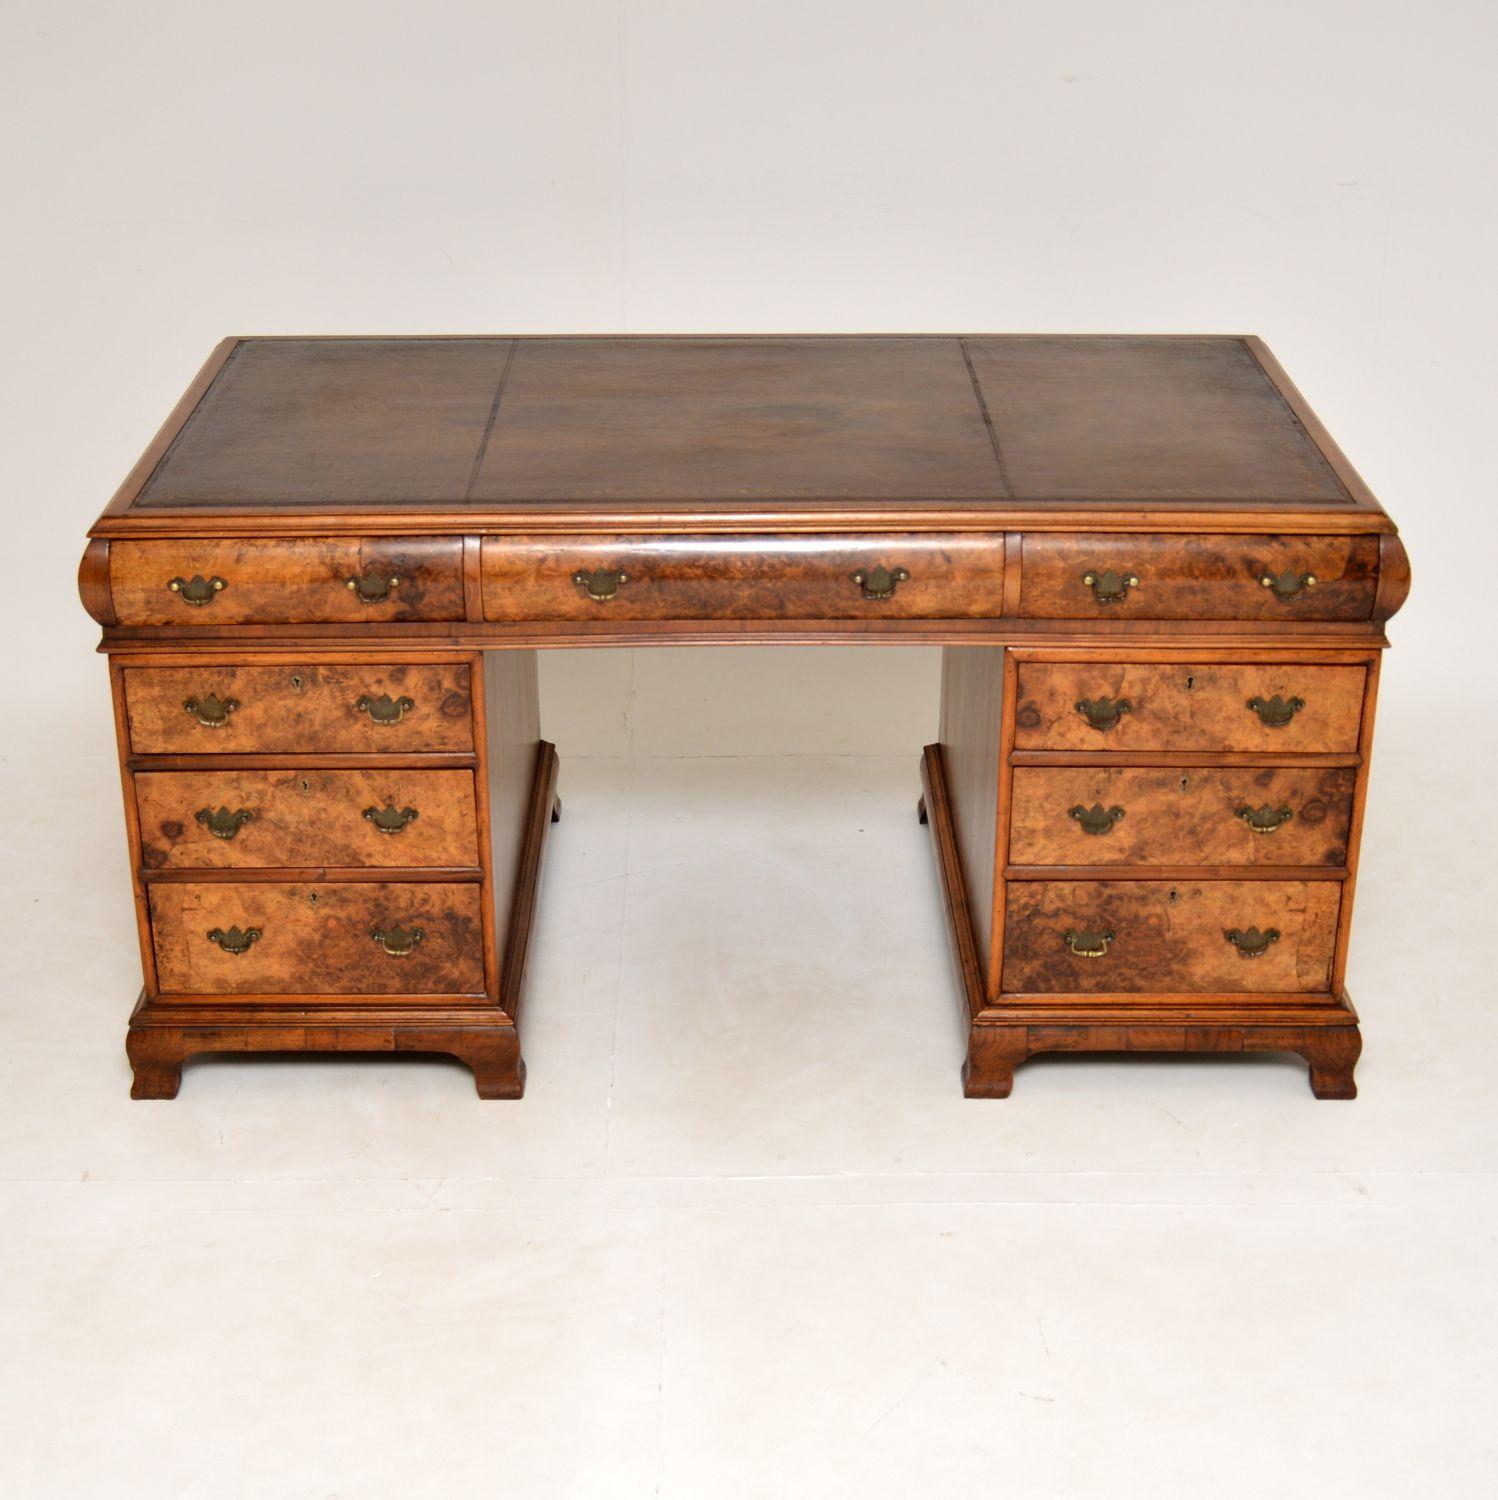 An outstanding antique pedestal desk in burr walnut with an inset leather top. This was made in England, it dates from around the 1900-1920’s period.
It is of superb quality and is of large proportions. This model is sometimes called a cushioned